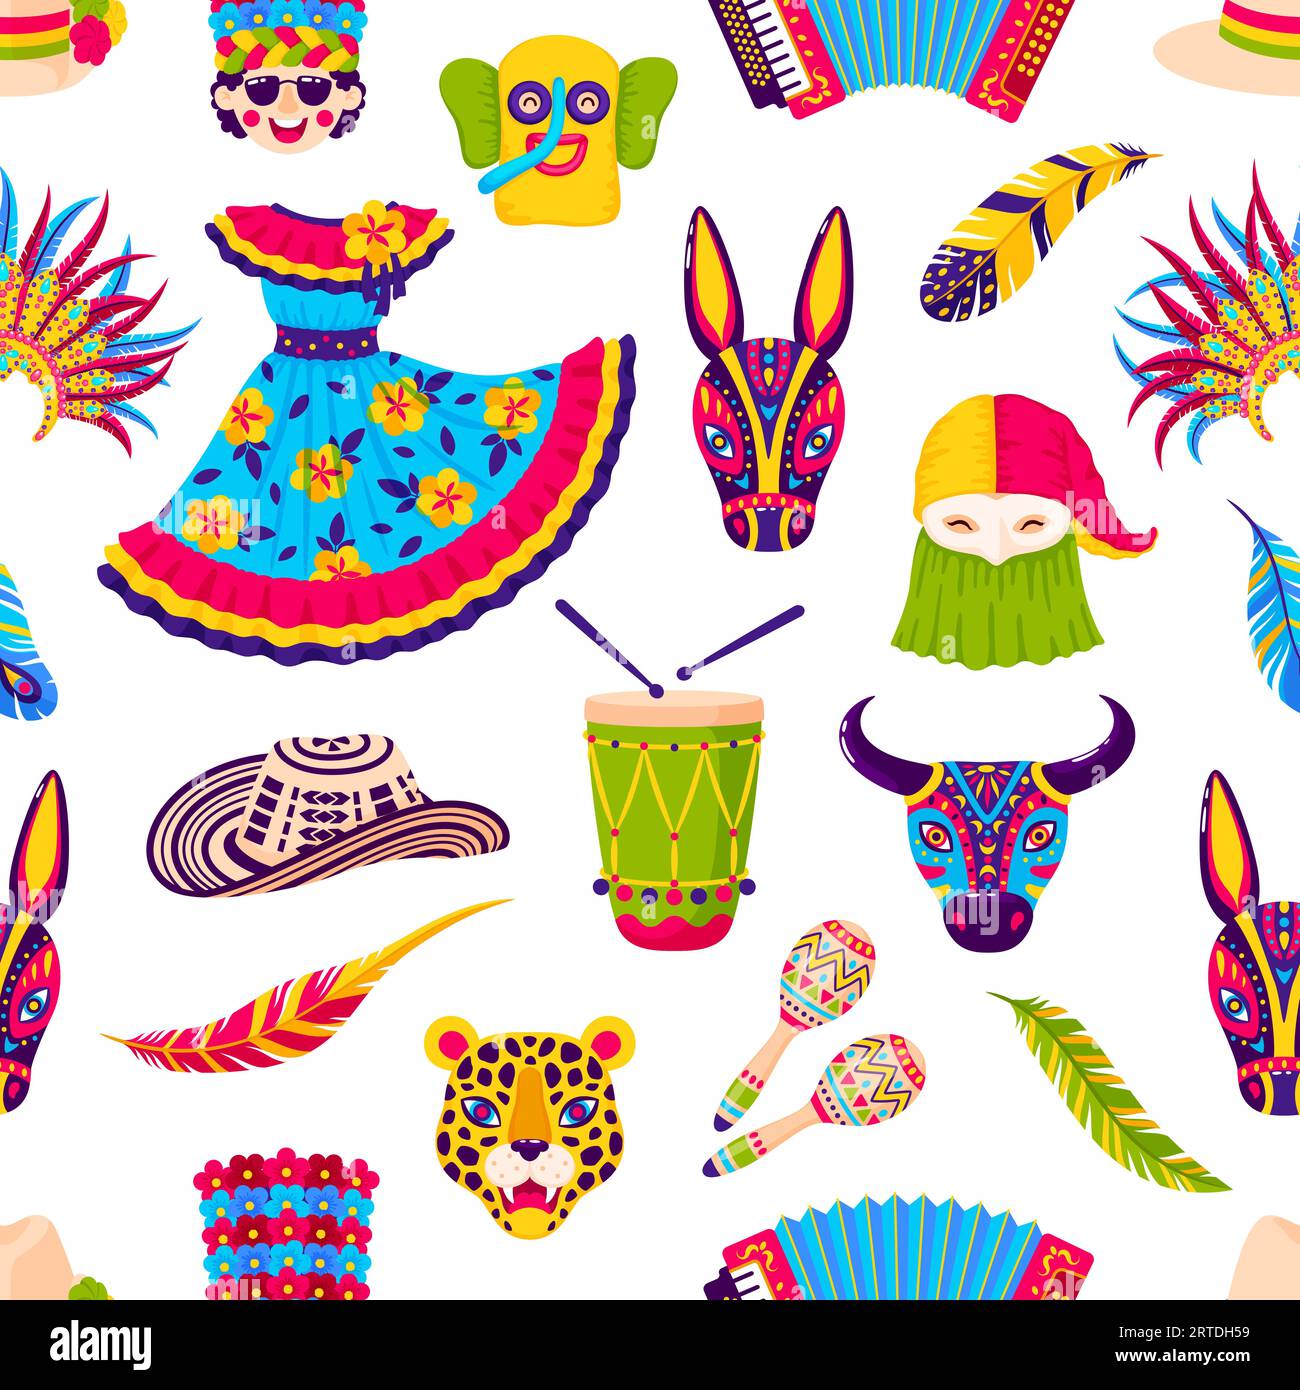 Barranquilla carnival seamless pattern. Vector tile background with holiday traditional feathers, crown, bright dress, hat, animal mask, maracas, accordion and drum for folkloric party celebration Stock Vector